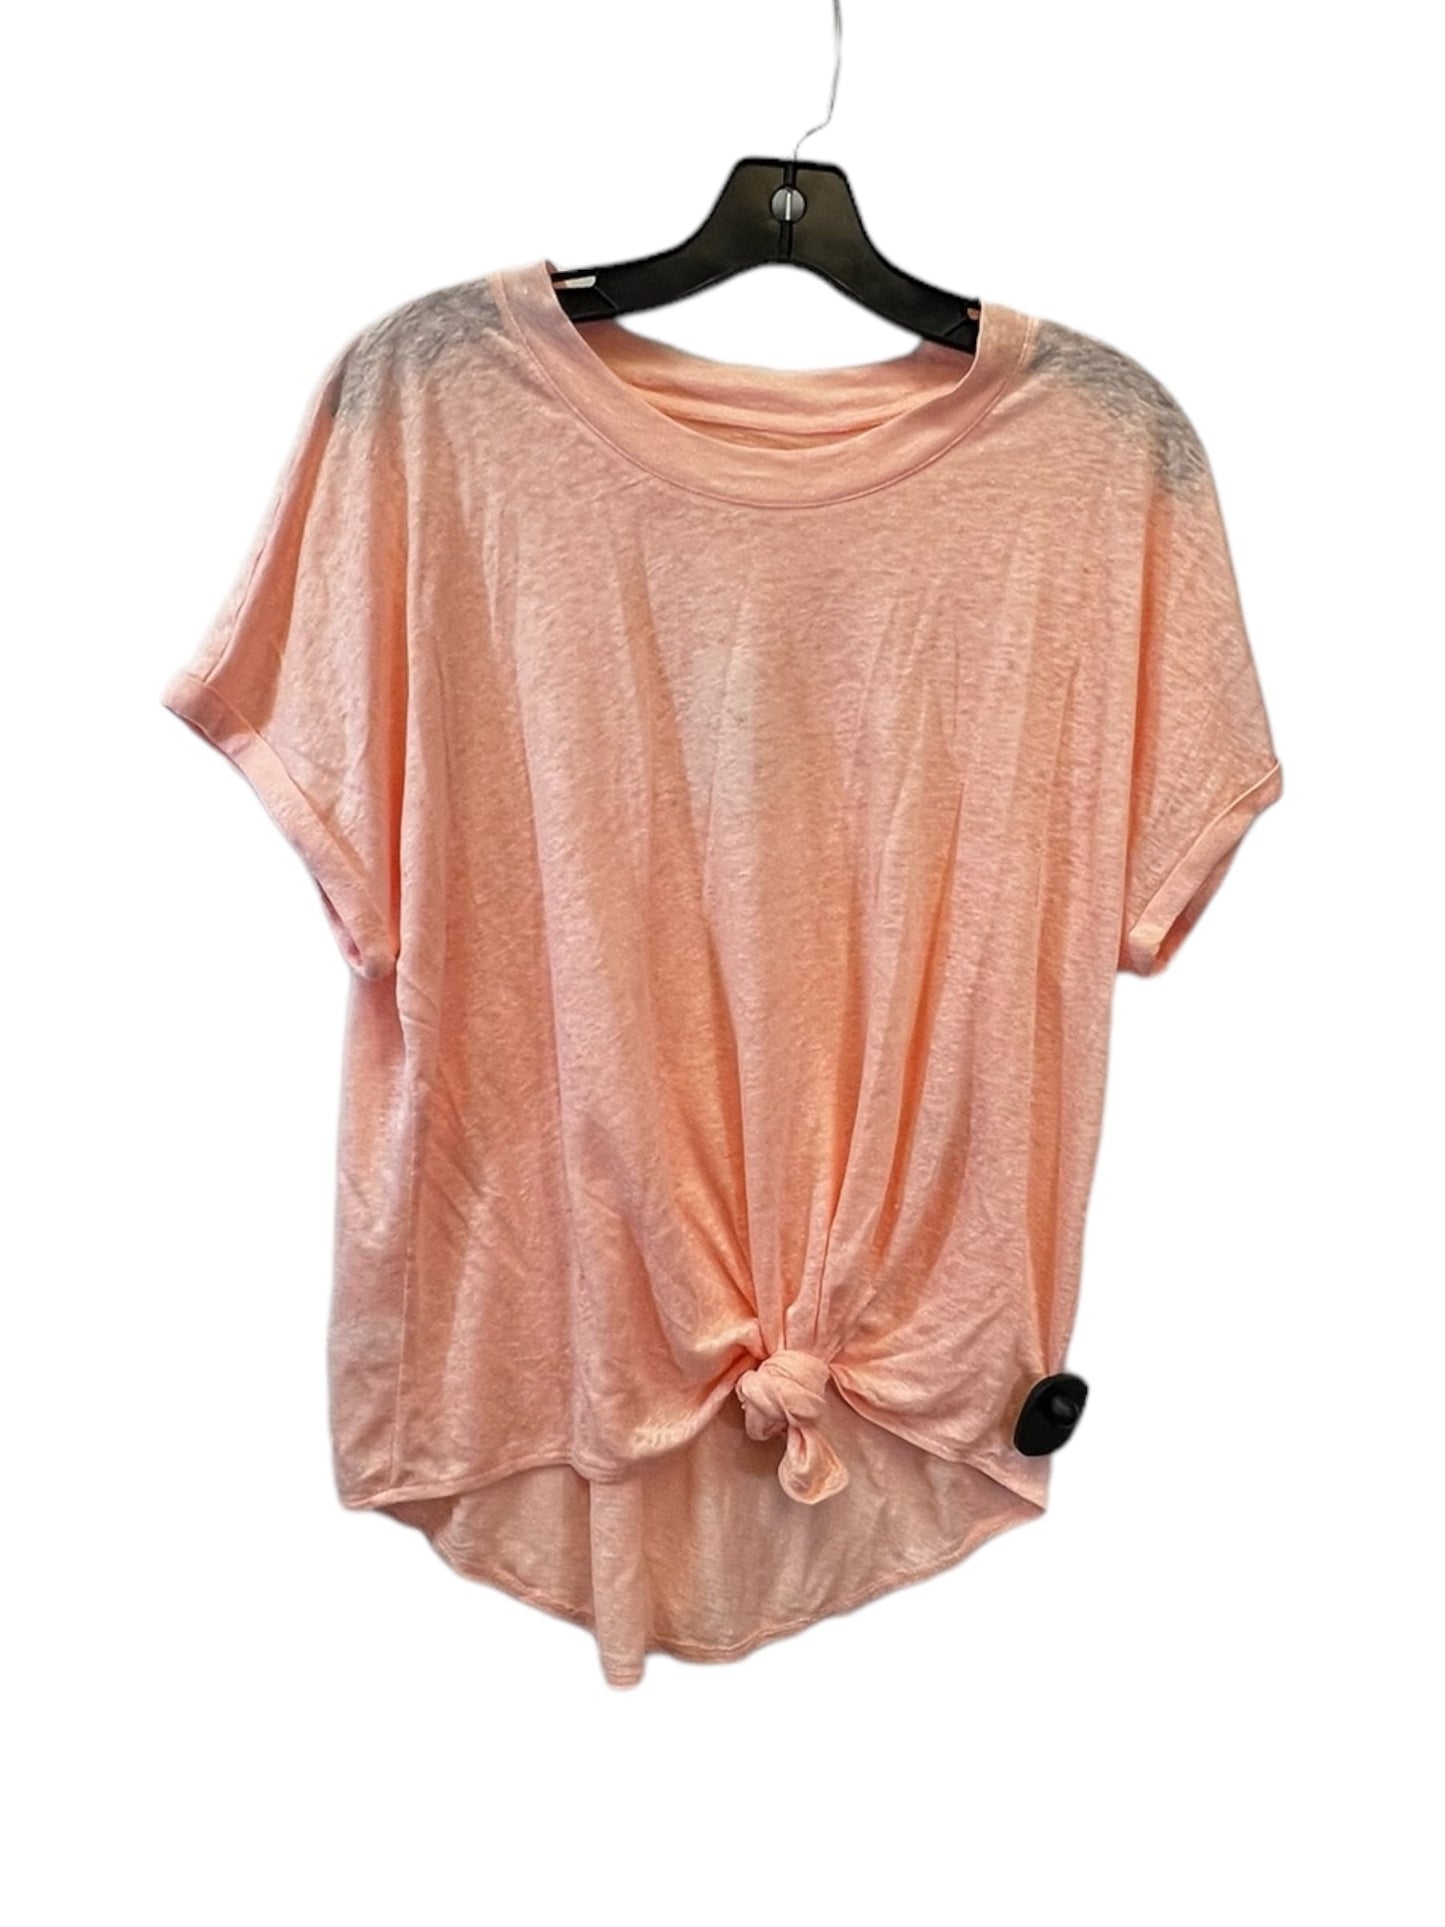 Peach Top Short Sleeve Lou And Grey, Size M